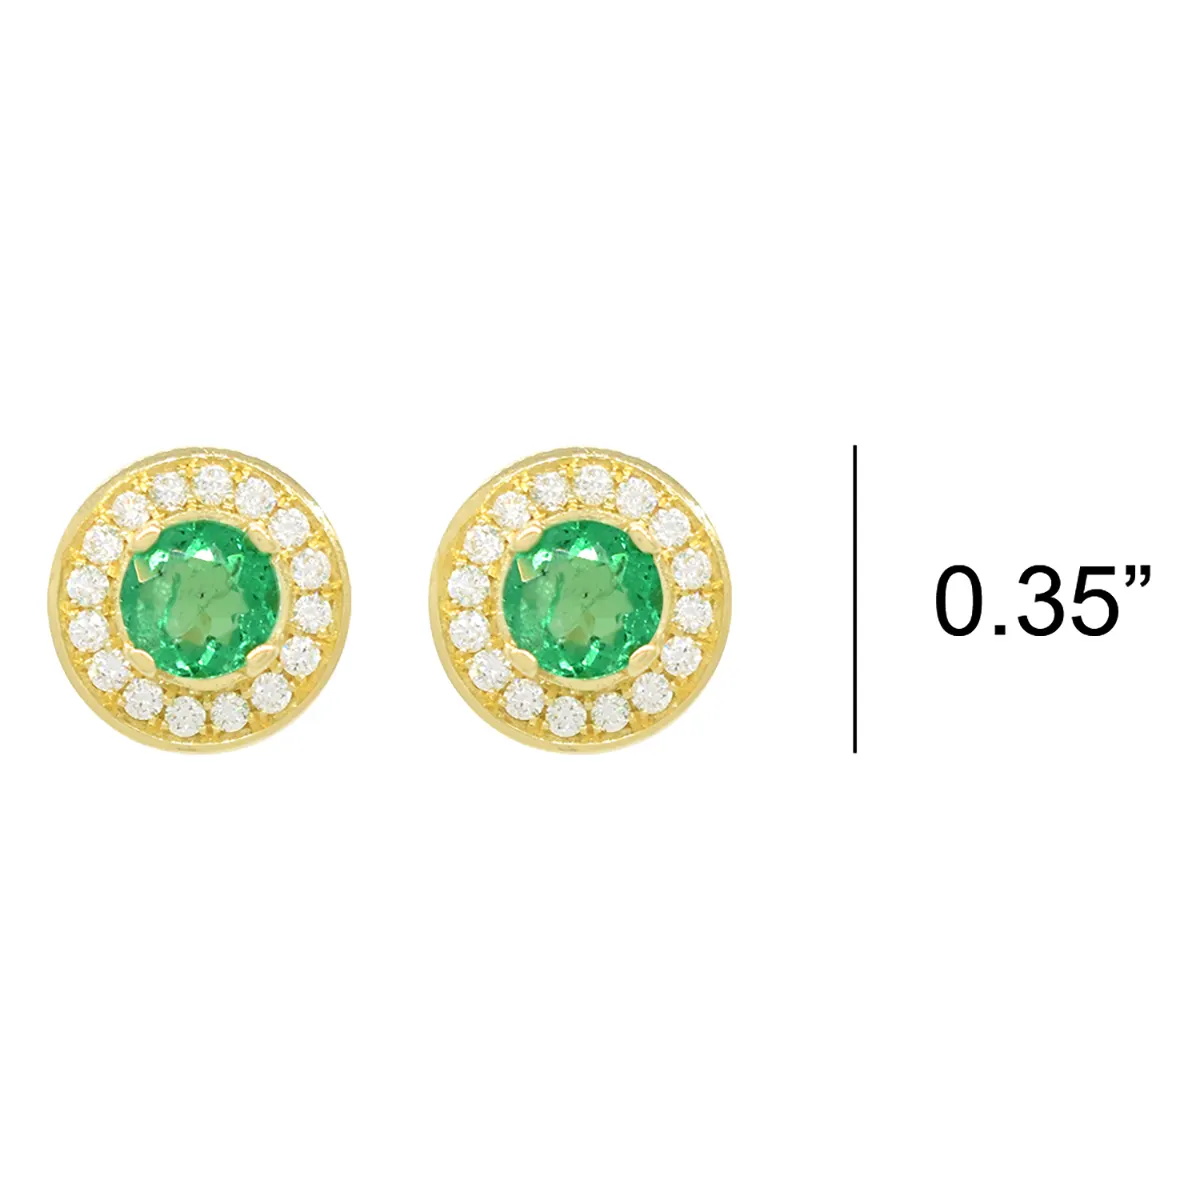 The diameter of these stud emerald and diamond earrings is 0.35 inches, a little more than 1/3 of an inch, the perfect size for a medium size studs earrings